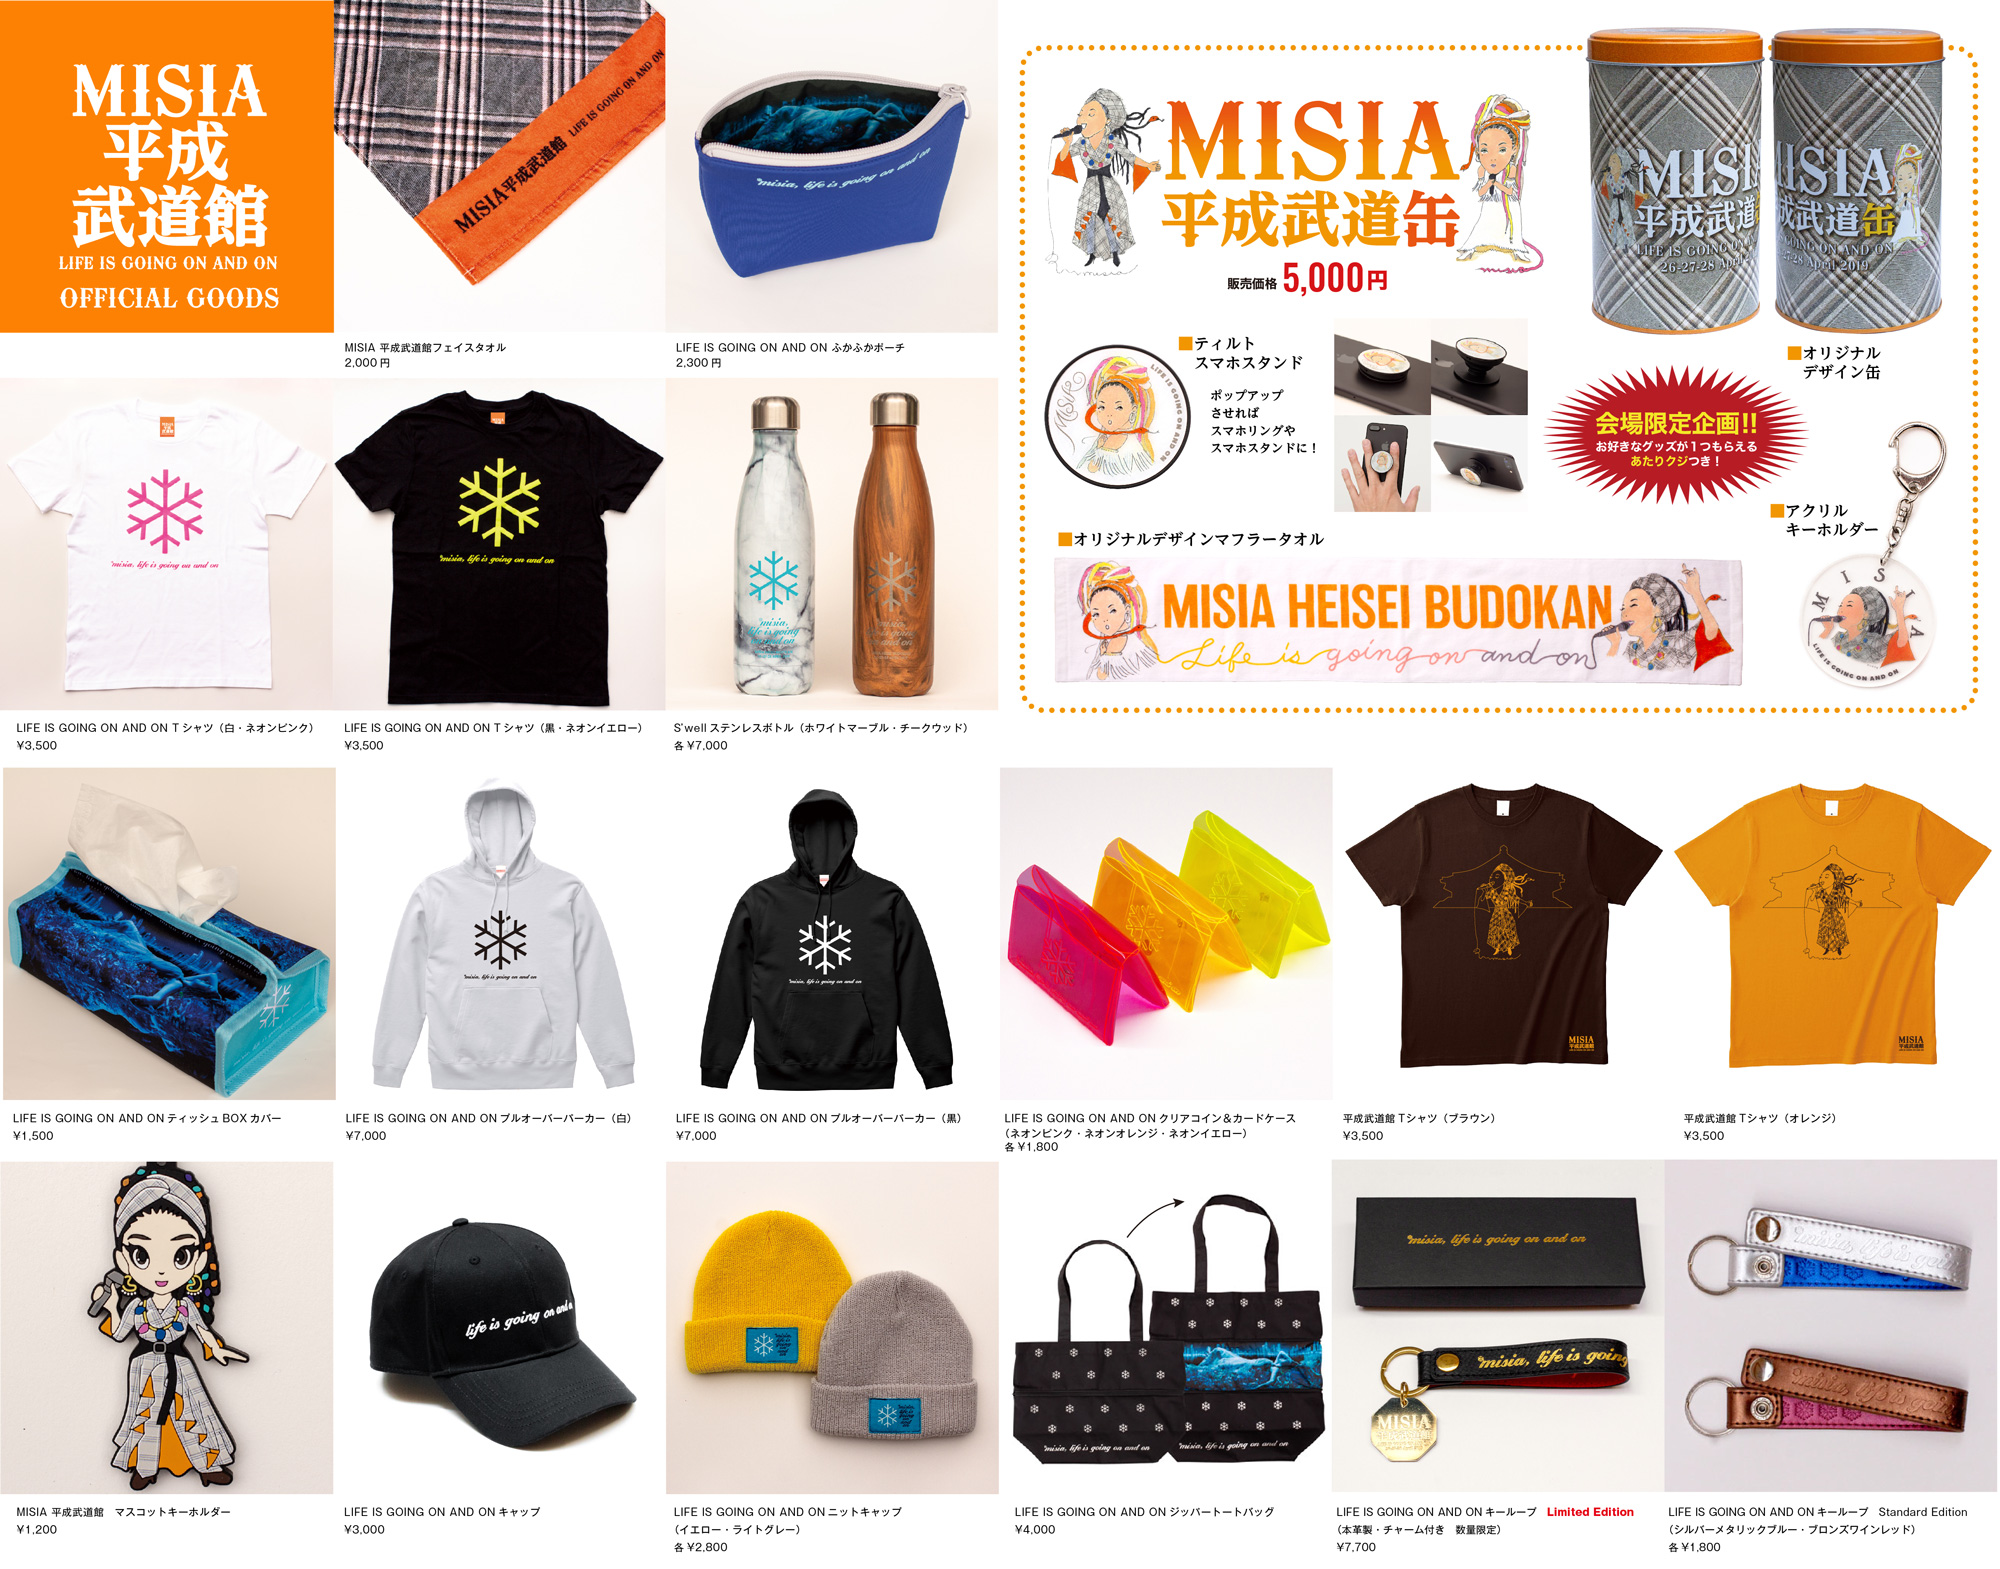 「MISIA 平成武道館 LIFE IS GOING ON AND ON」オリジナルグッズのお知らせ | NEWS | 【公式】MISIA